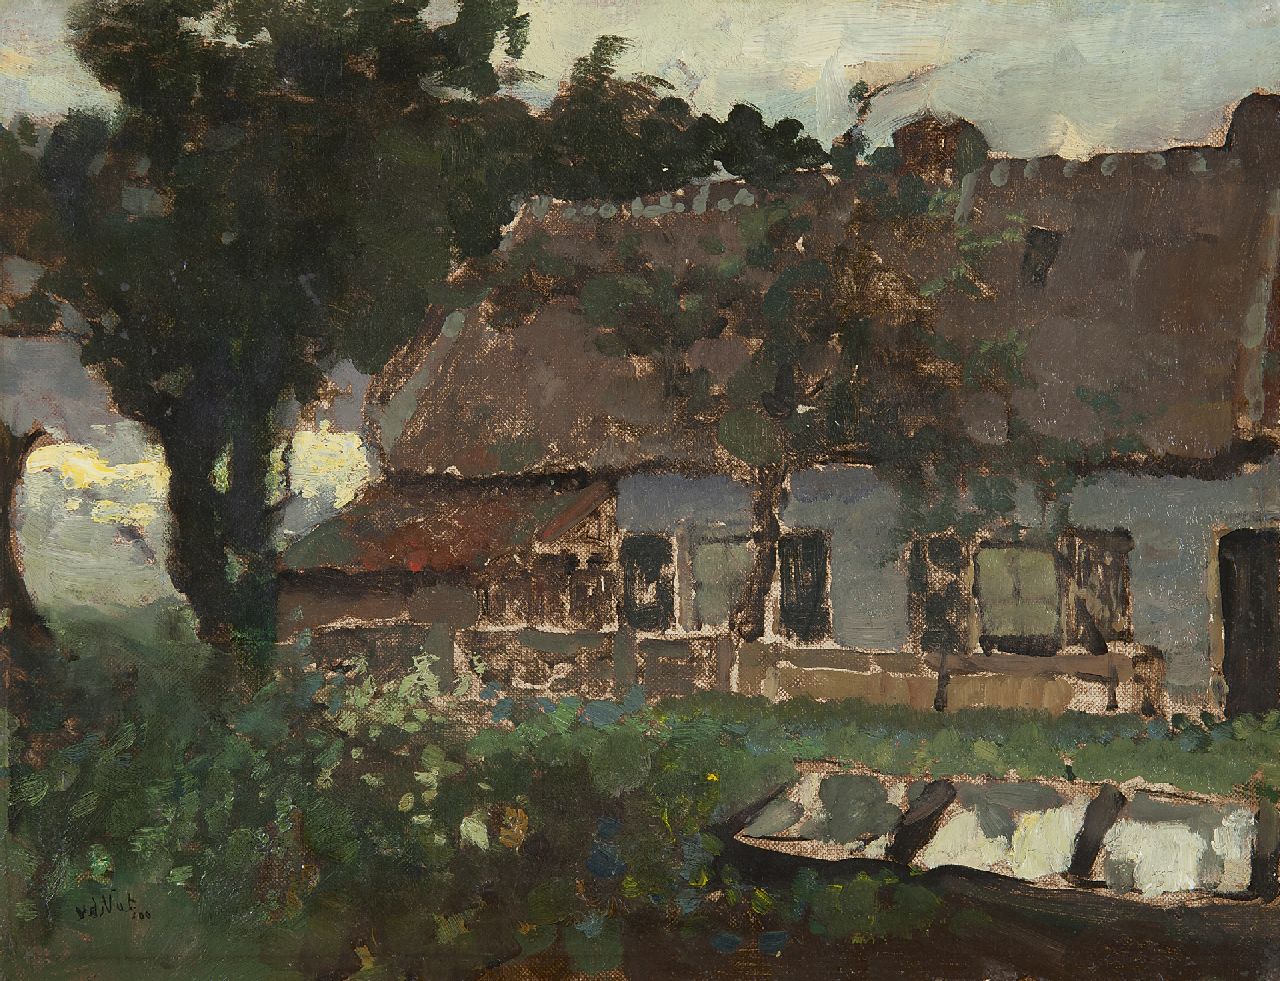 Nat W.H. van der | 'Willem' Hendrik van der Nat, Greenhouses near a farm, oil on canvas laid down on board 27.5 x 35.5 cm, signed l.l. and painted '09